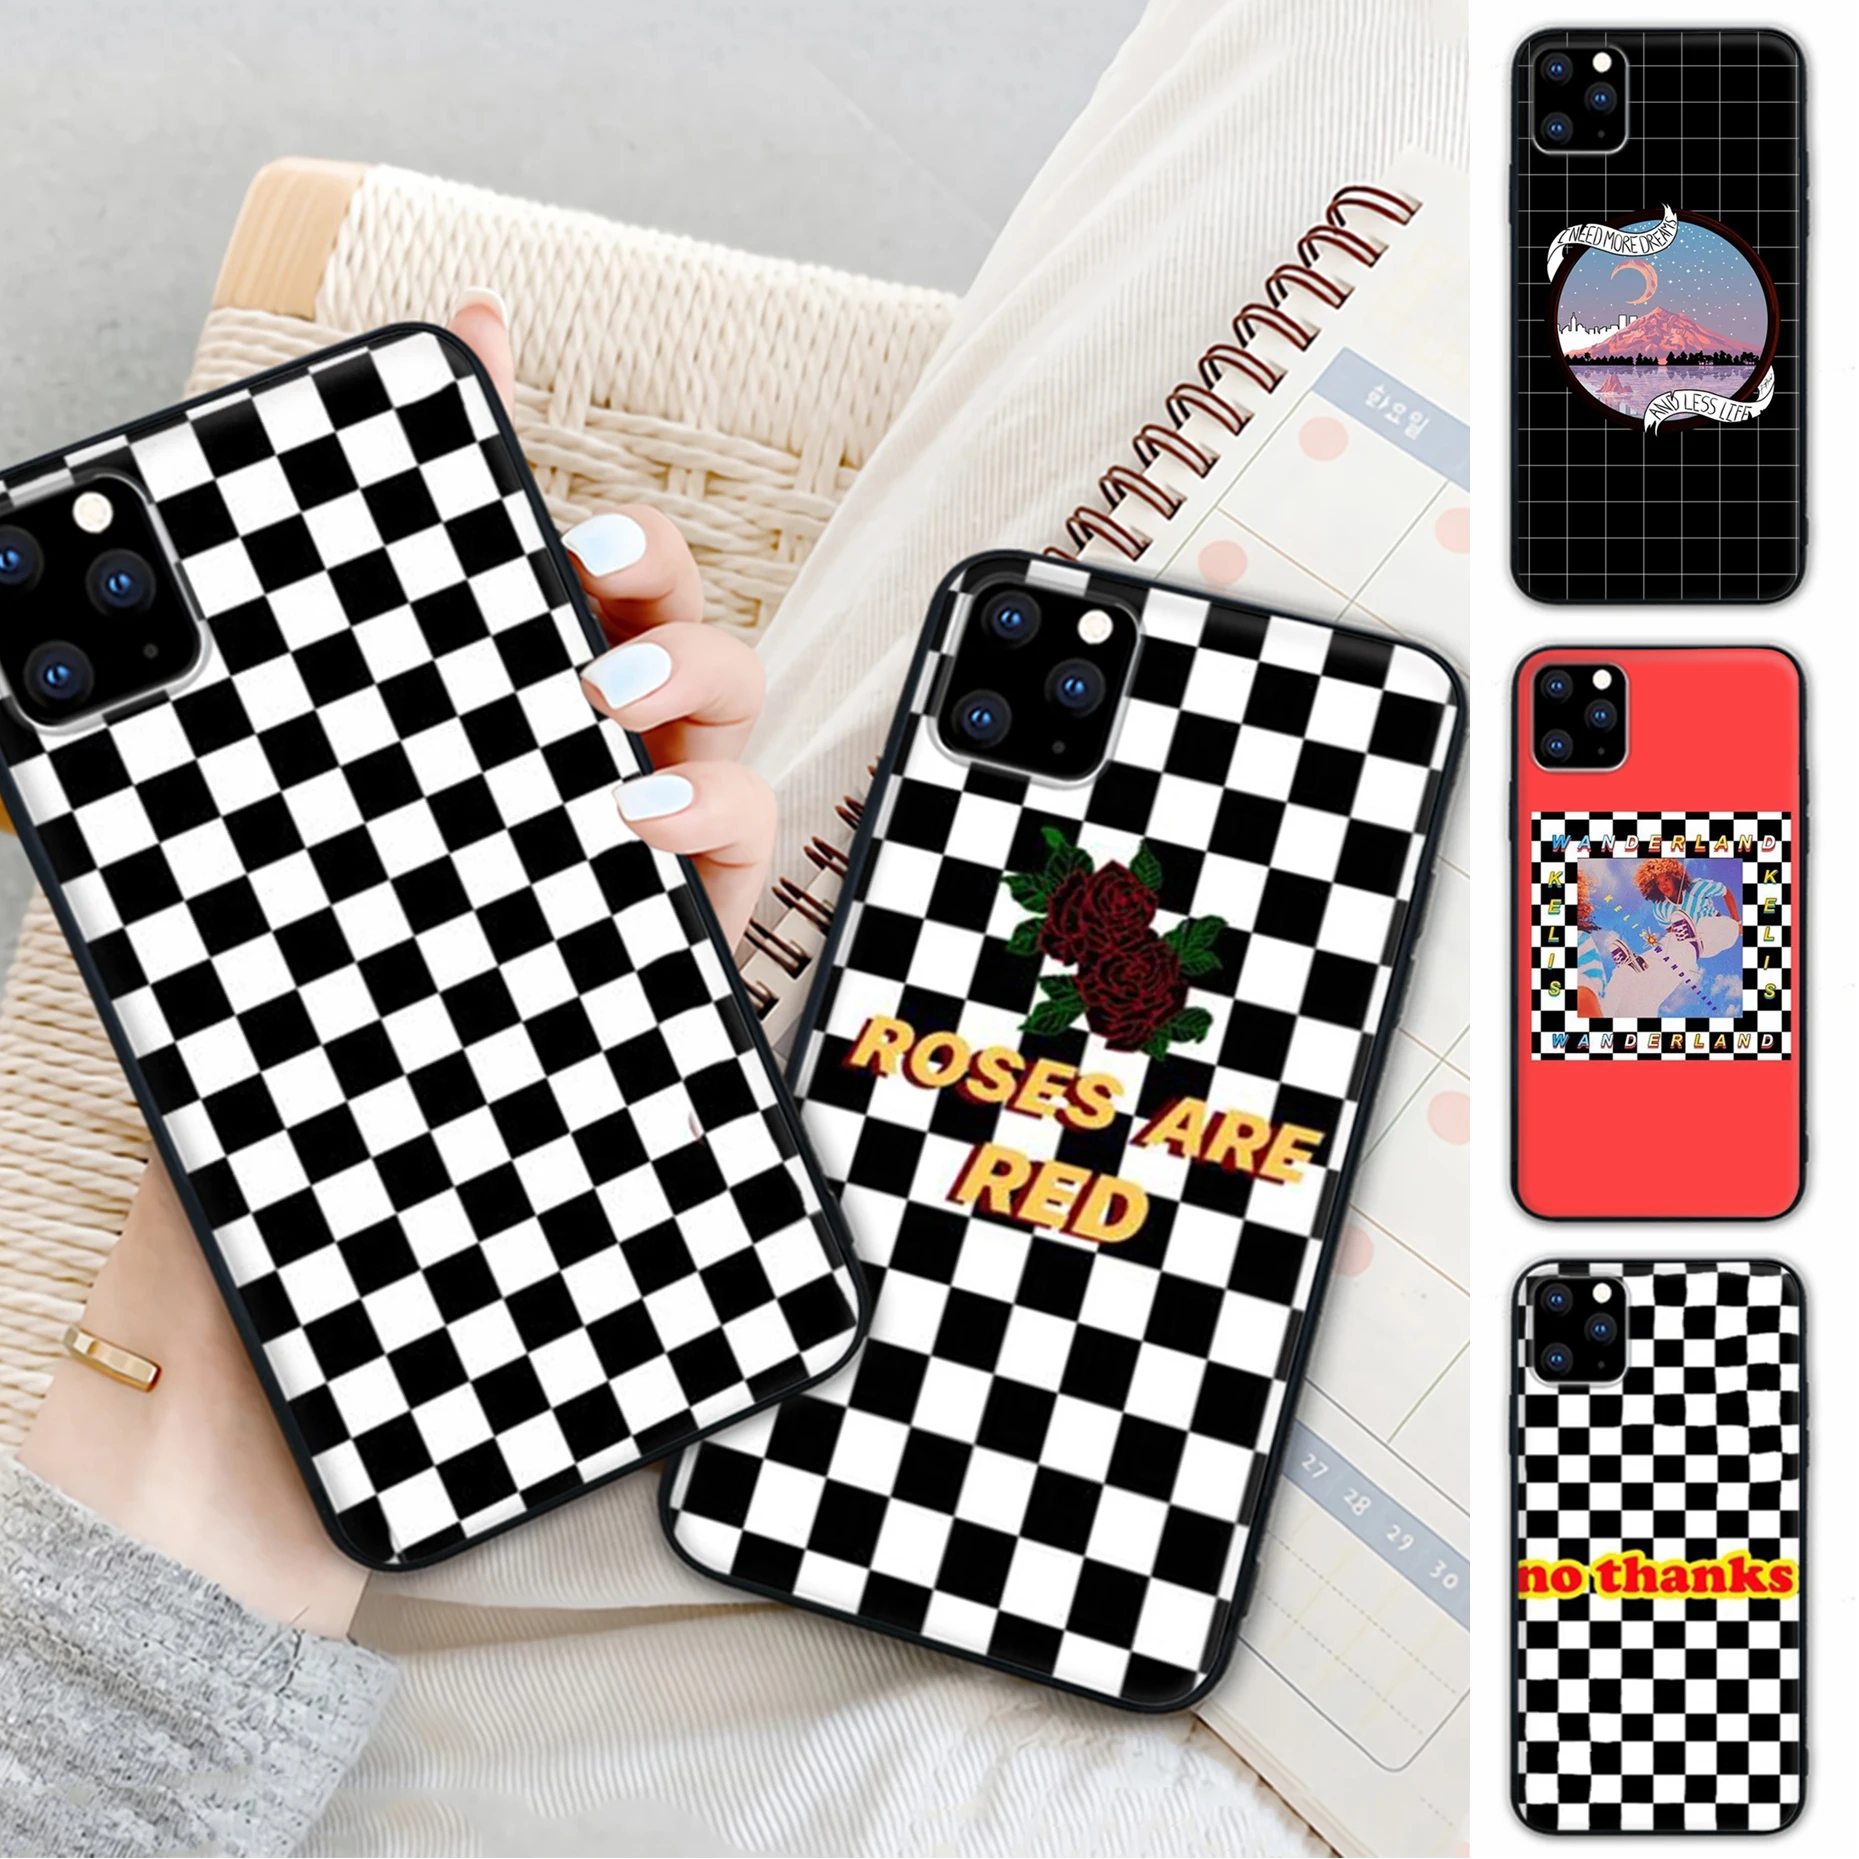 

Girly Black And White Chess Cellphone Cover Case For Huawei Honor 20 10 9 Lite 7A 9X 8x 8 S 20s 30 PRO PLAY